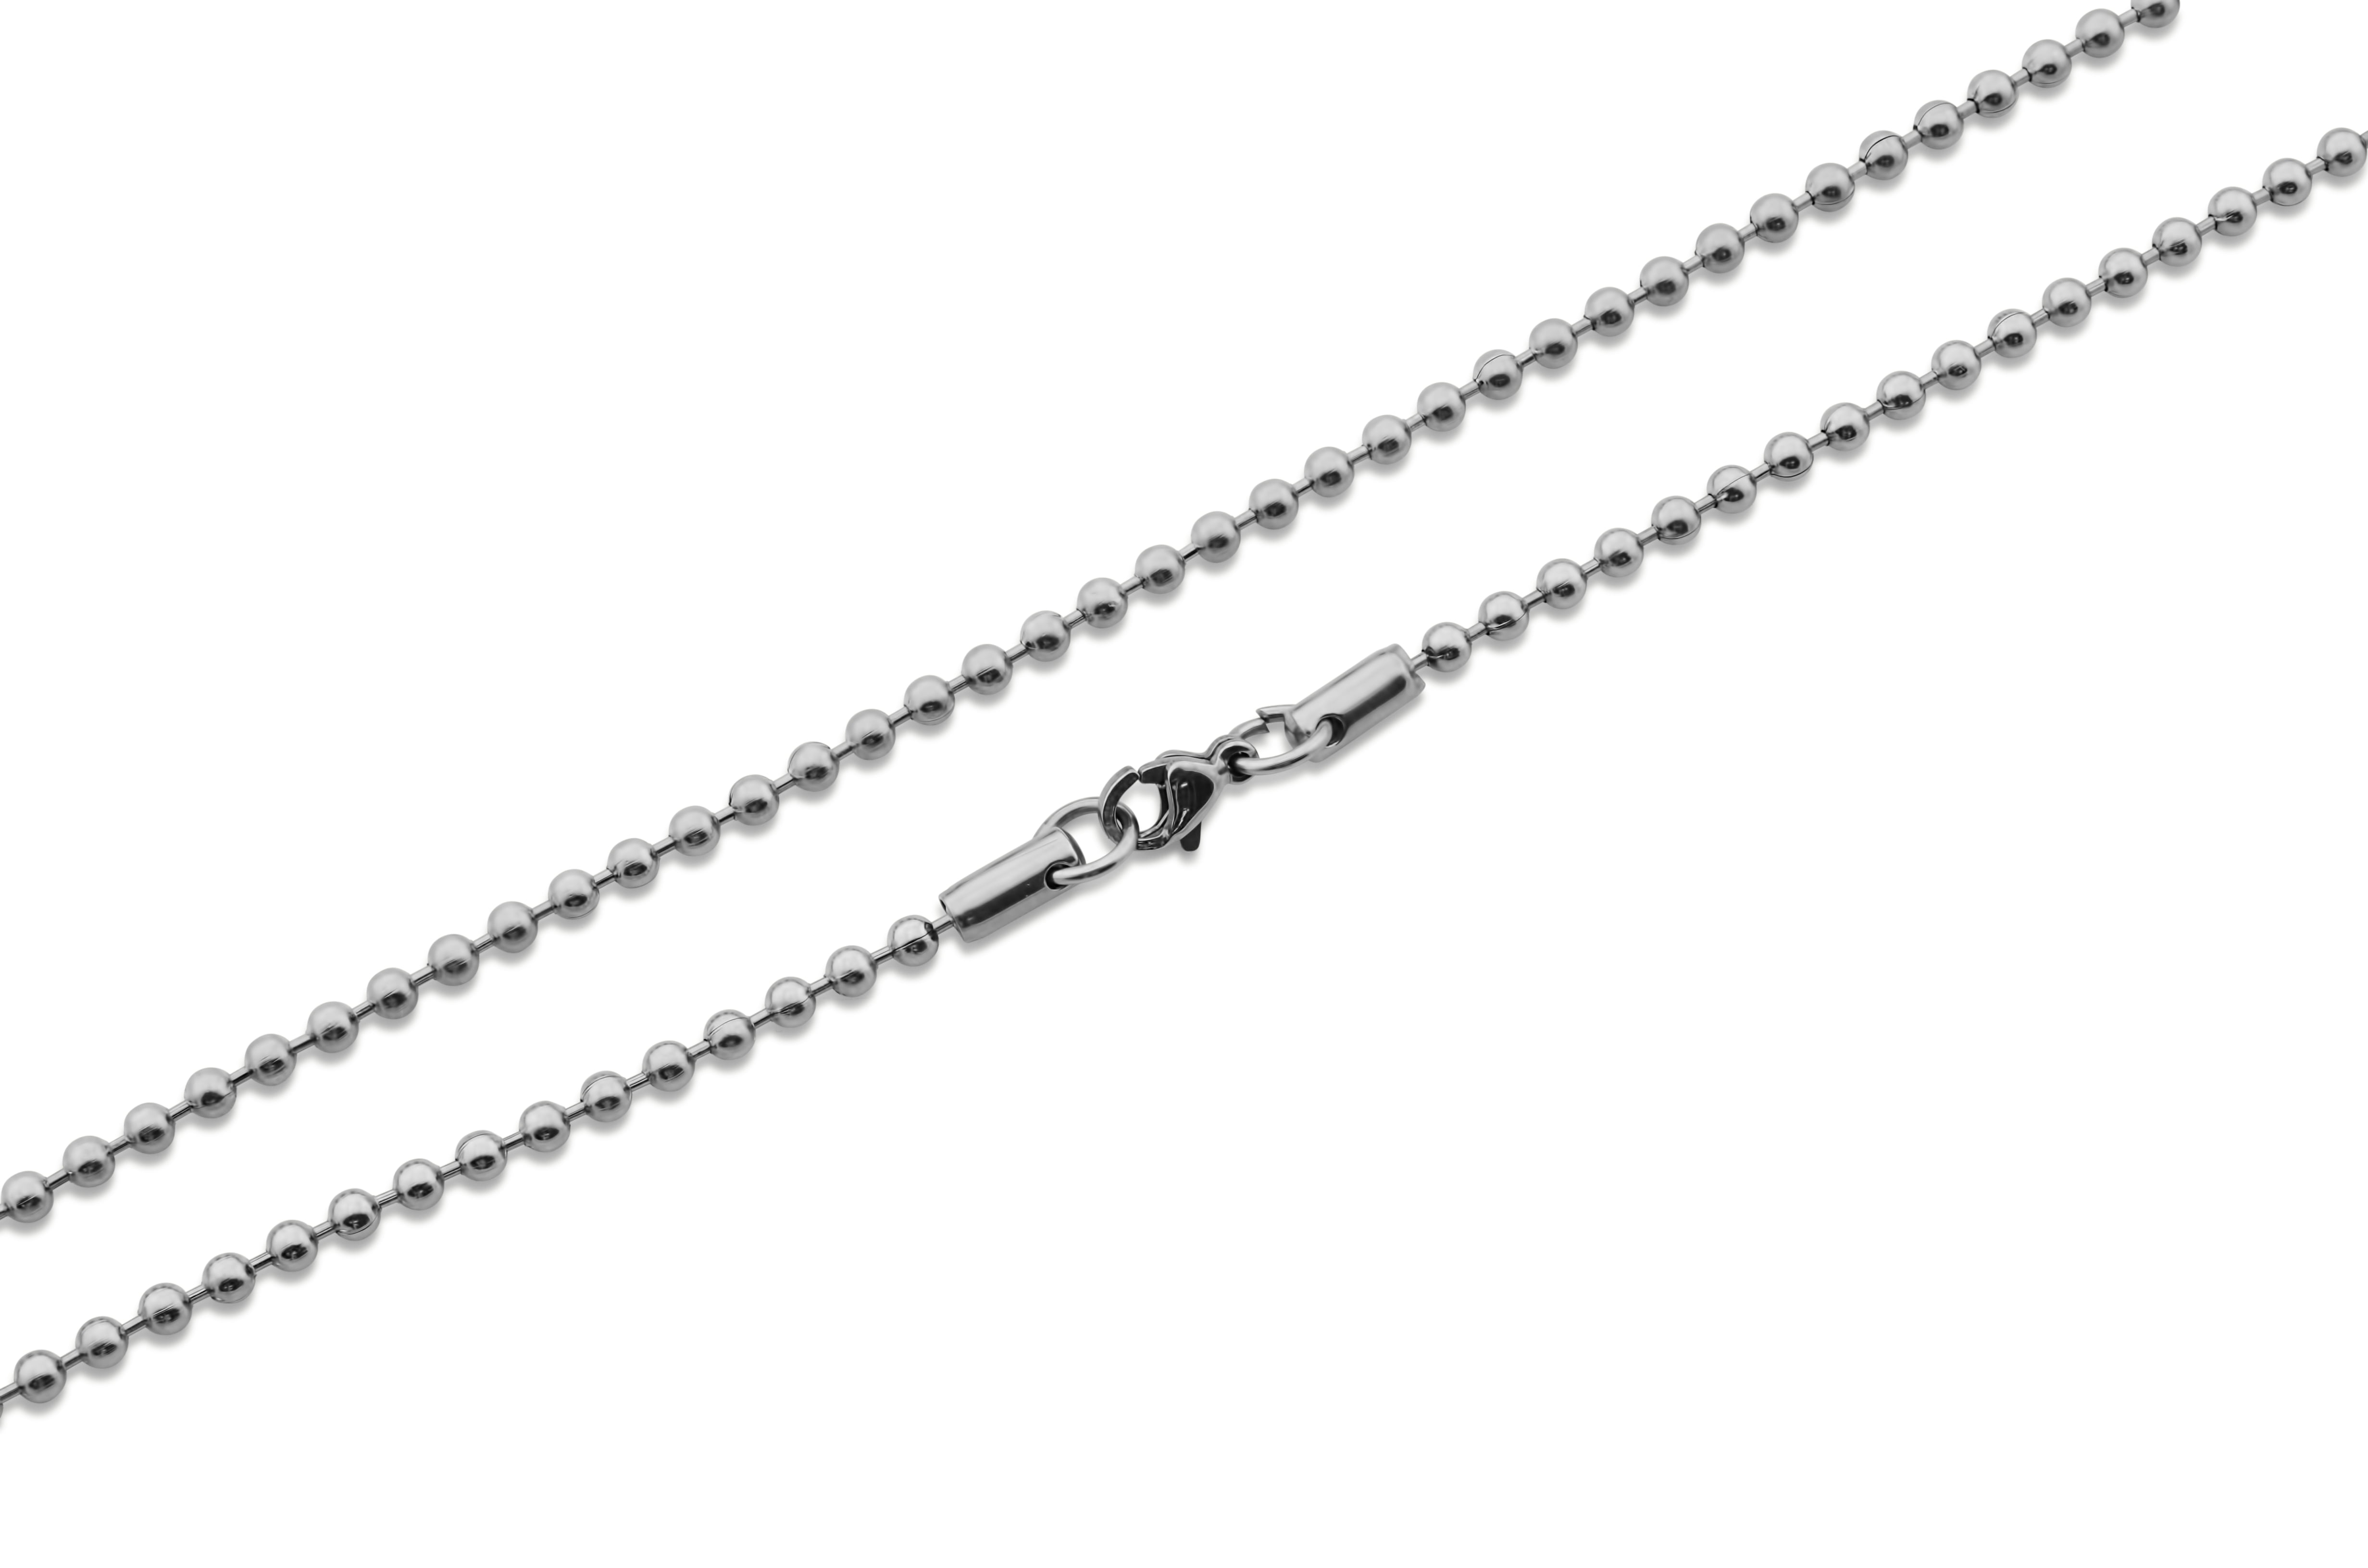 Ball Chain Dog Tag Necklace - 4 and 24 Inches Long - 2.4mm Bead Size -  Matching Connector - Adjustable Metal Bead Chain - Multiple Pack Sizes -  Black